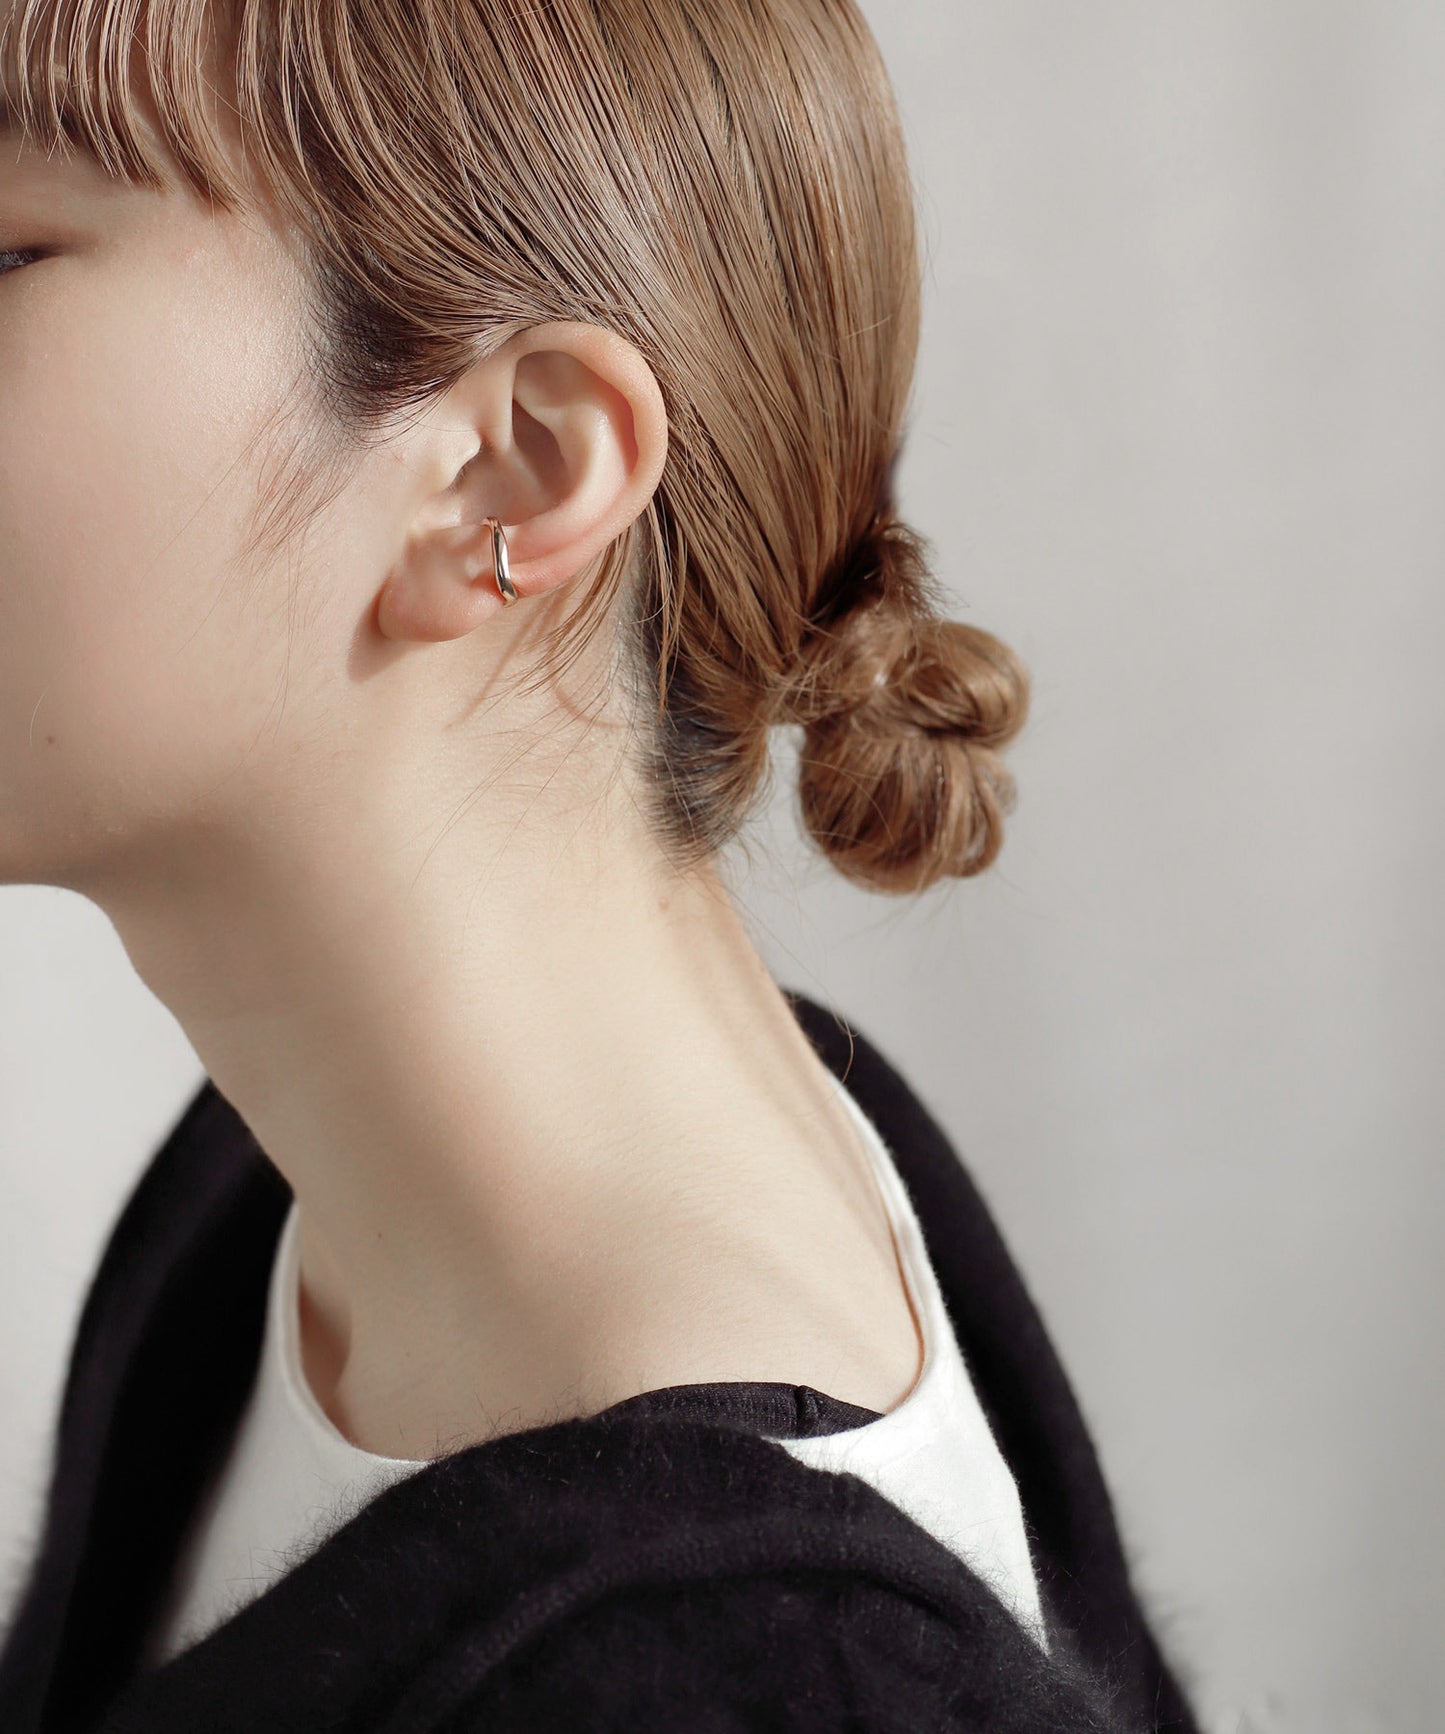 【Limited Quantity】Nuance Line Ear Cuff [Sheer Pink Nudie]